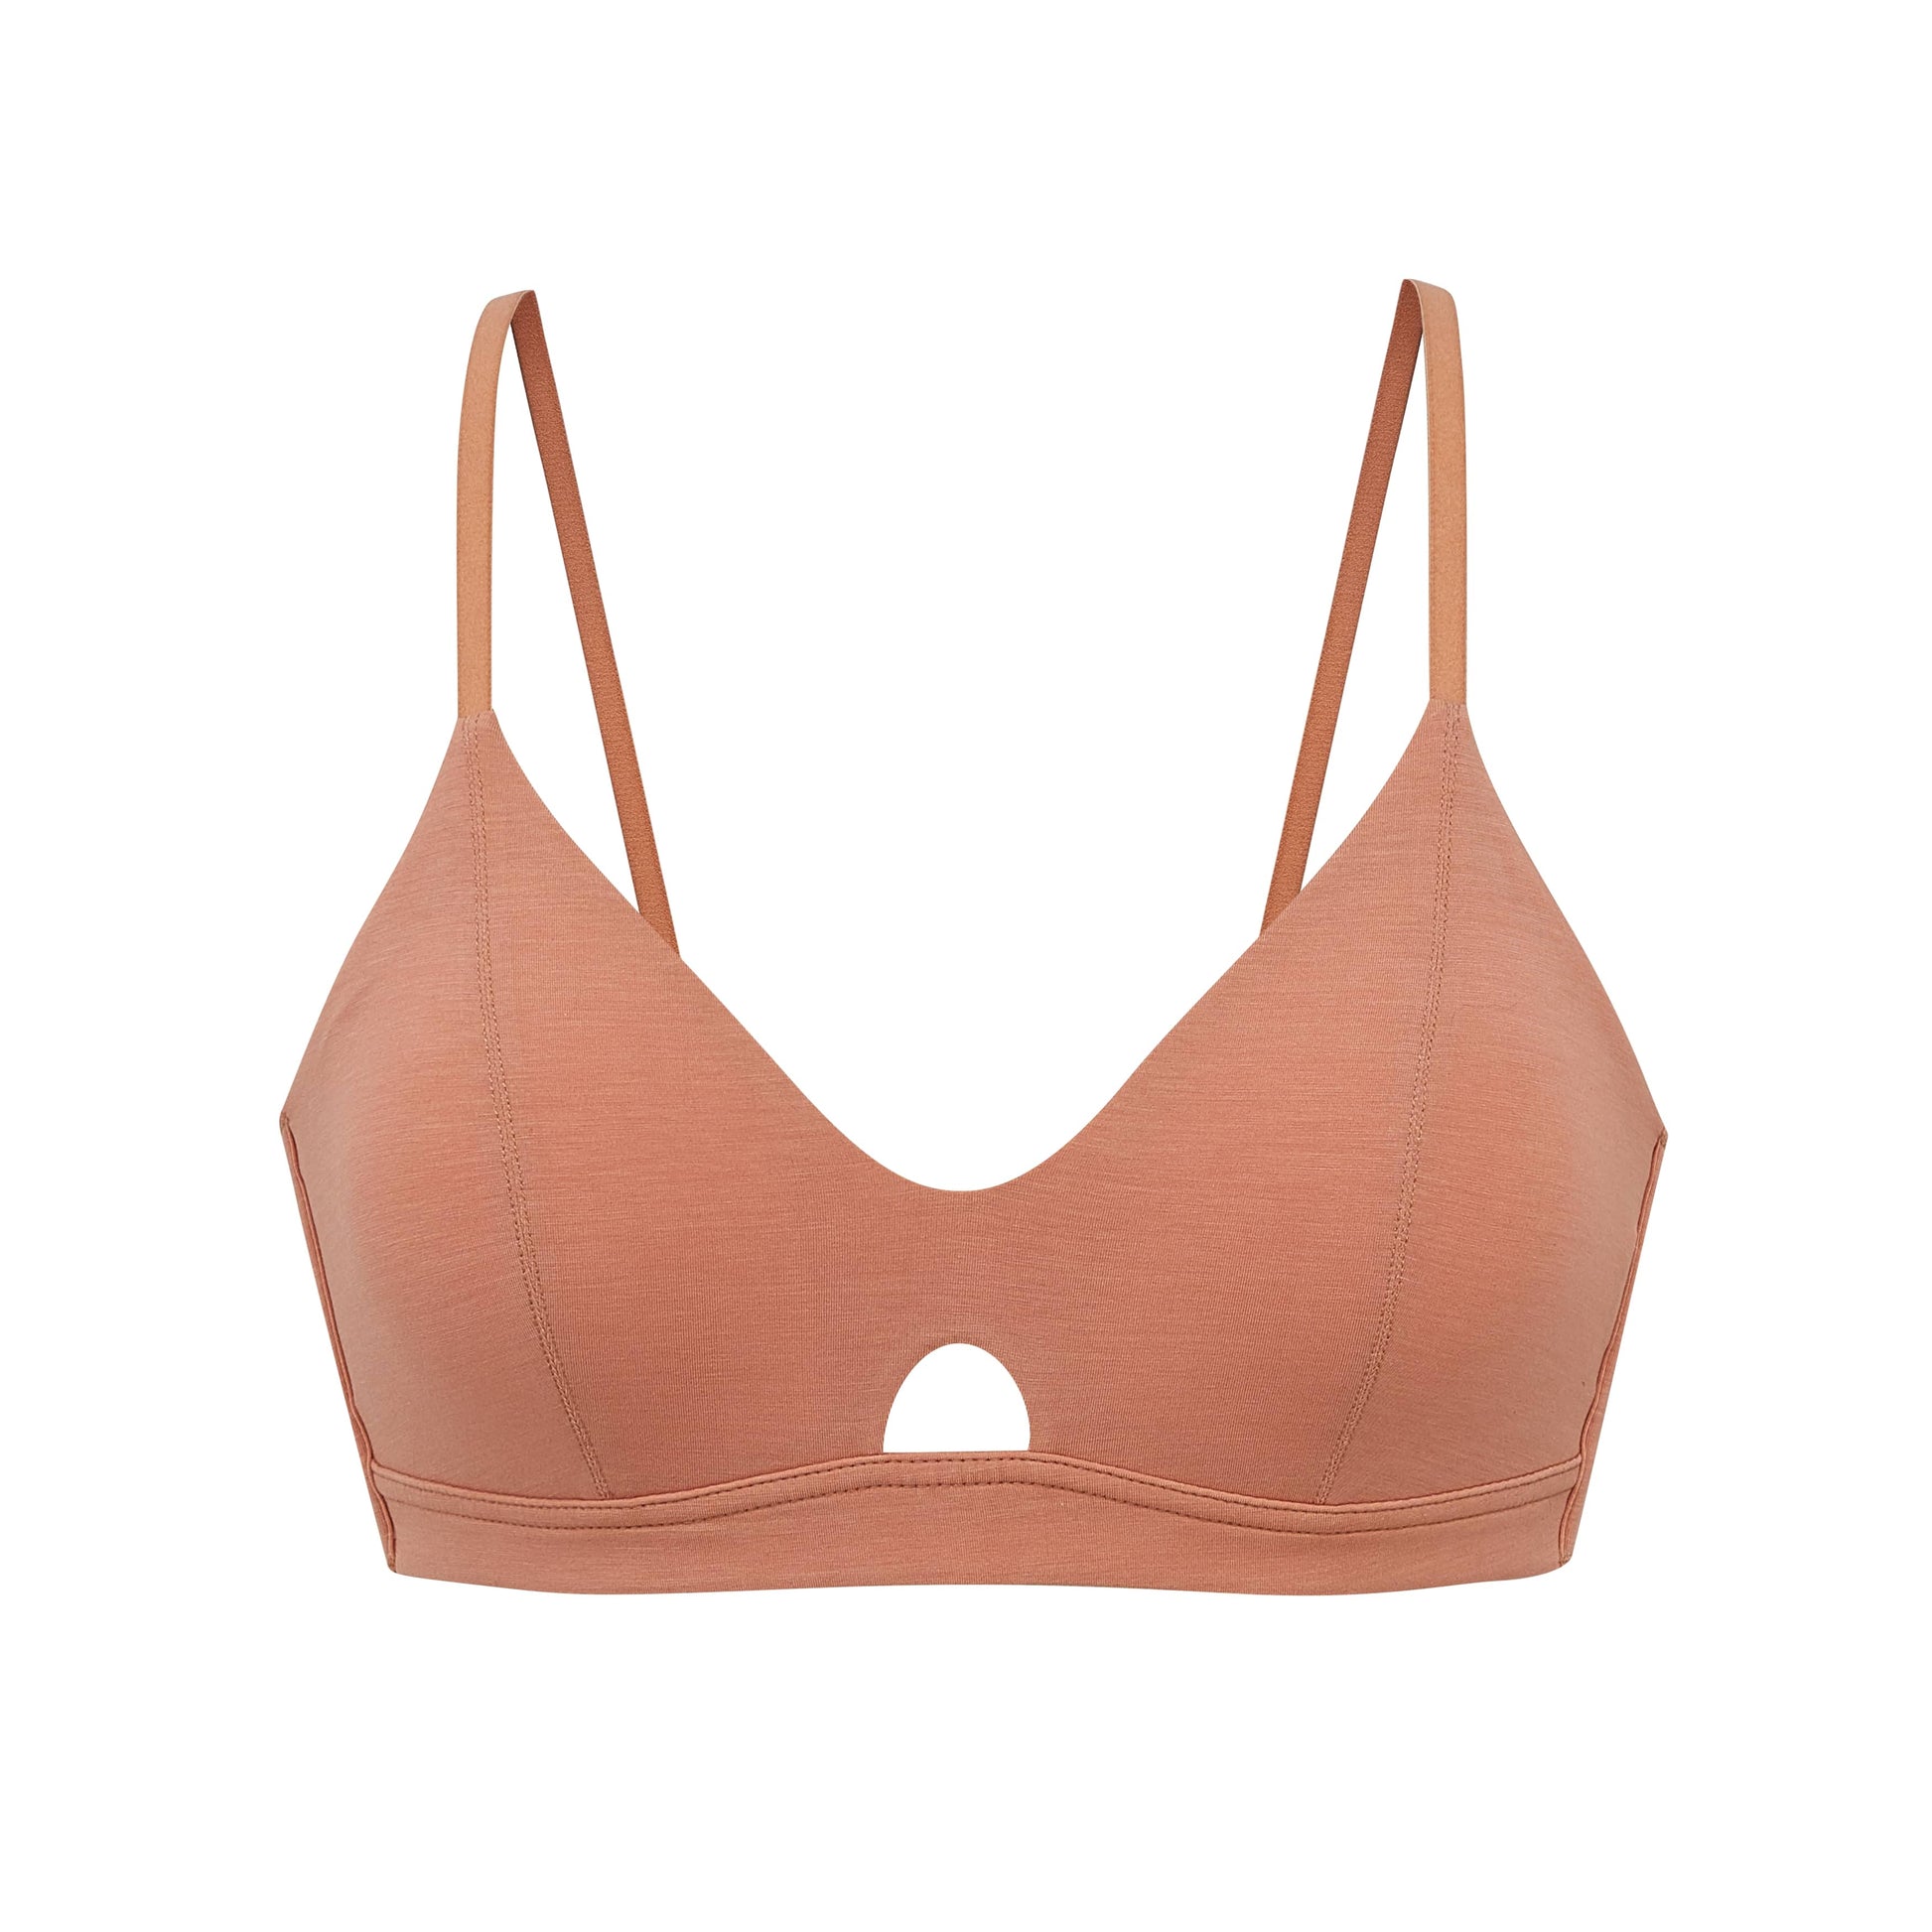 ChicCup Wireless&Seamless Bra: Freedom in Comfort, Confidence in Style